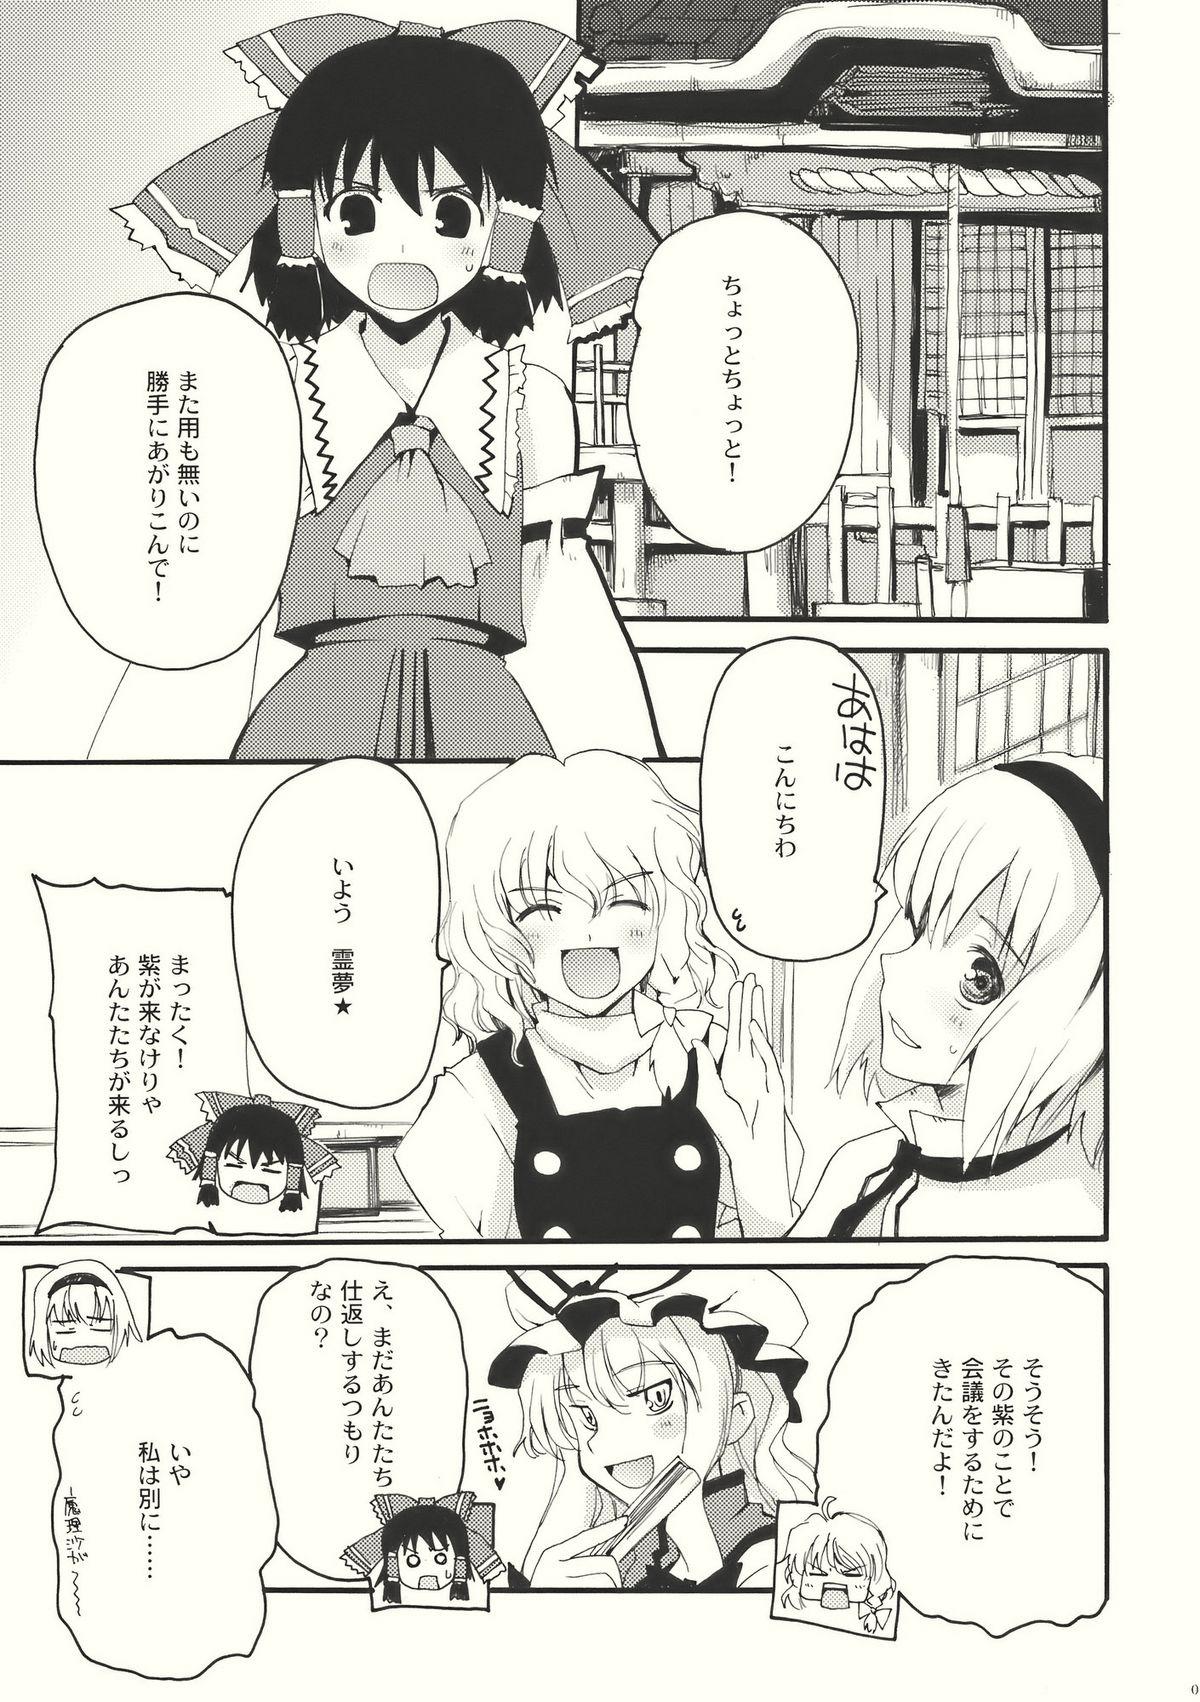 Porn Blow Jobs Let Me Take You Home Tonight! 2 - Touhou project Blondes - Page 5